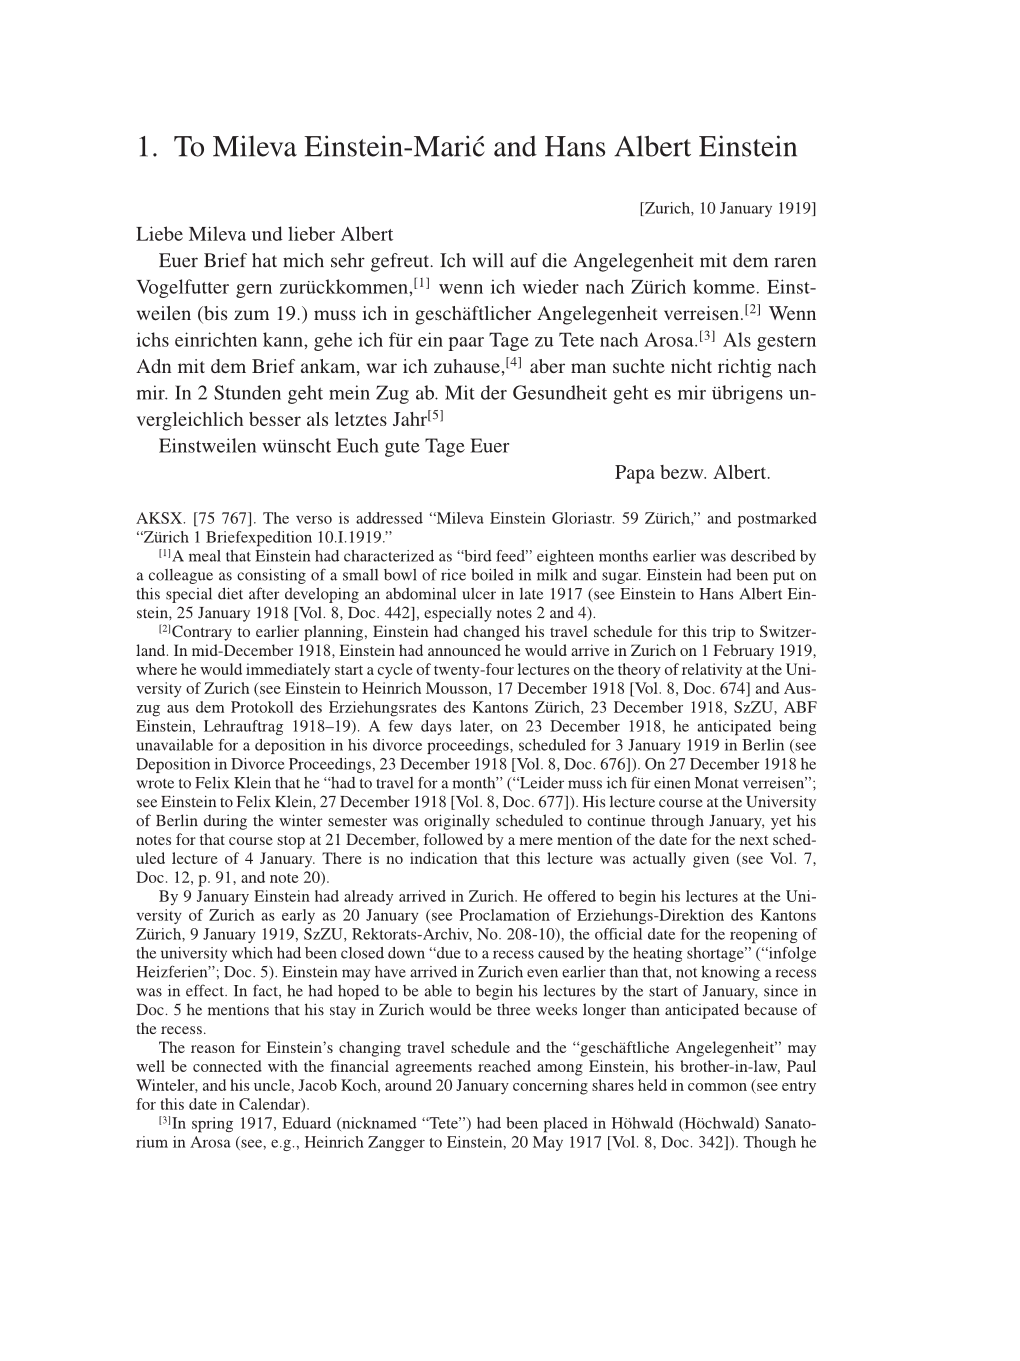 Volume 9: The Berlin Years: Correspondence January 1919-April 1920 page 3